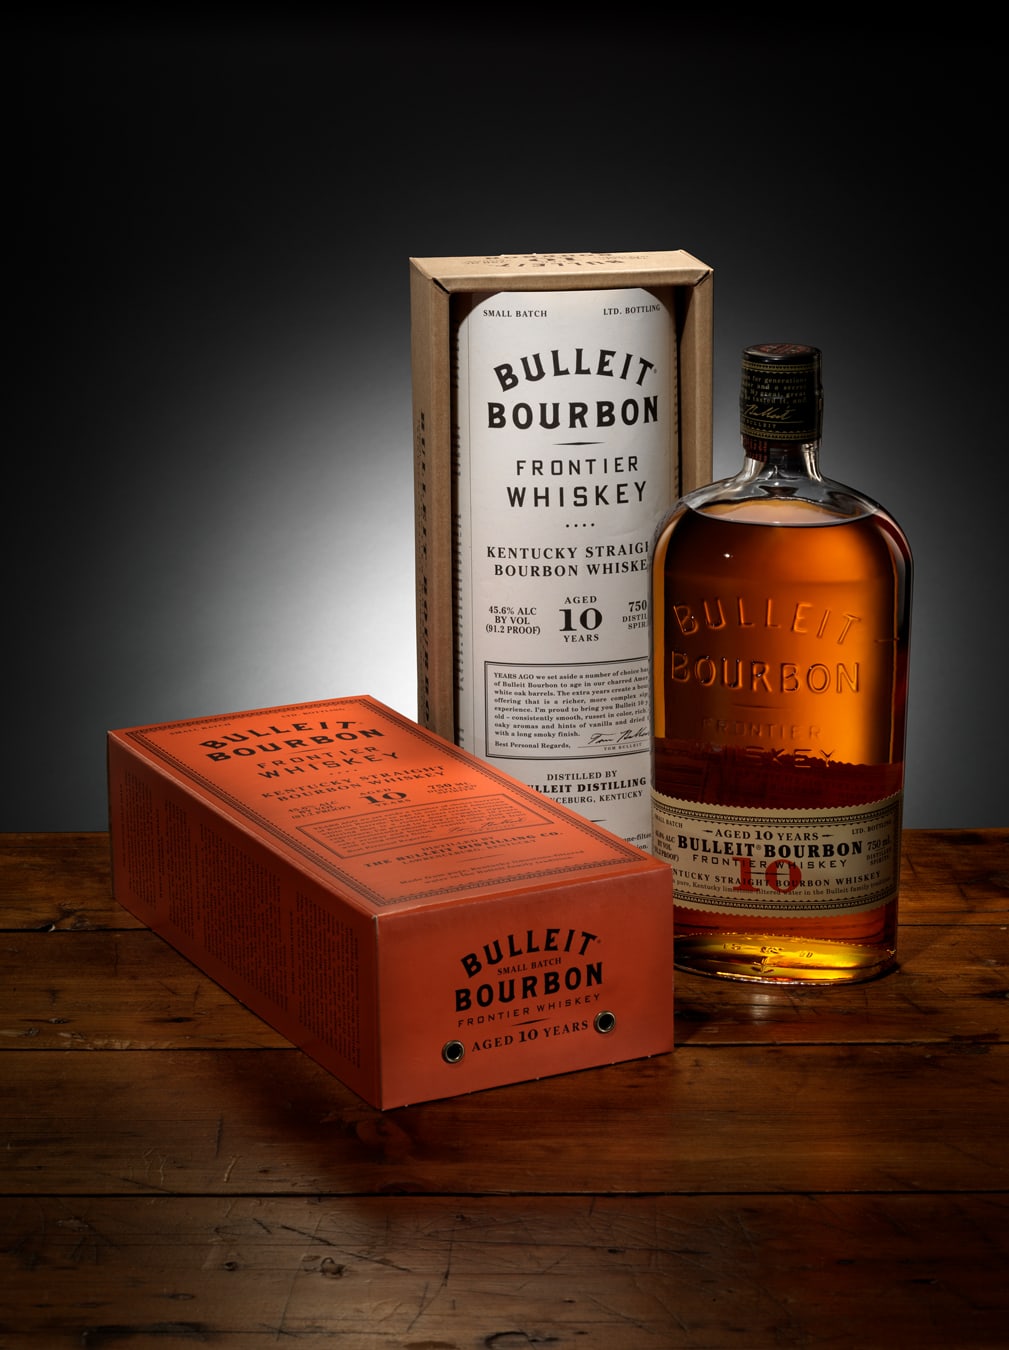 Bulleit Bourbon Aged 10 years bottle and box package design